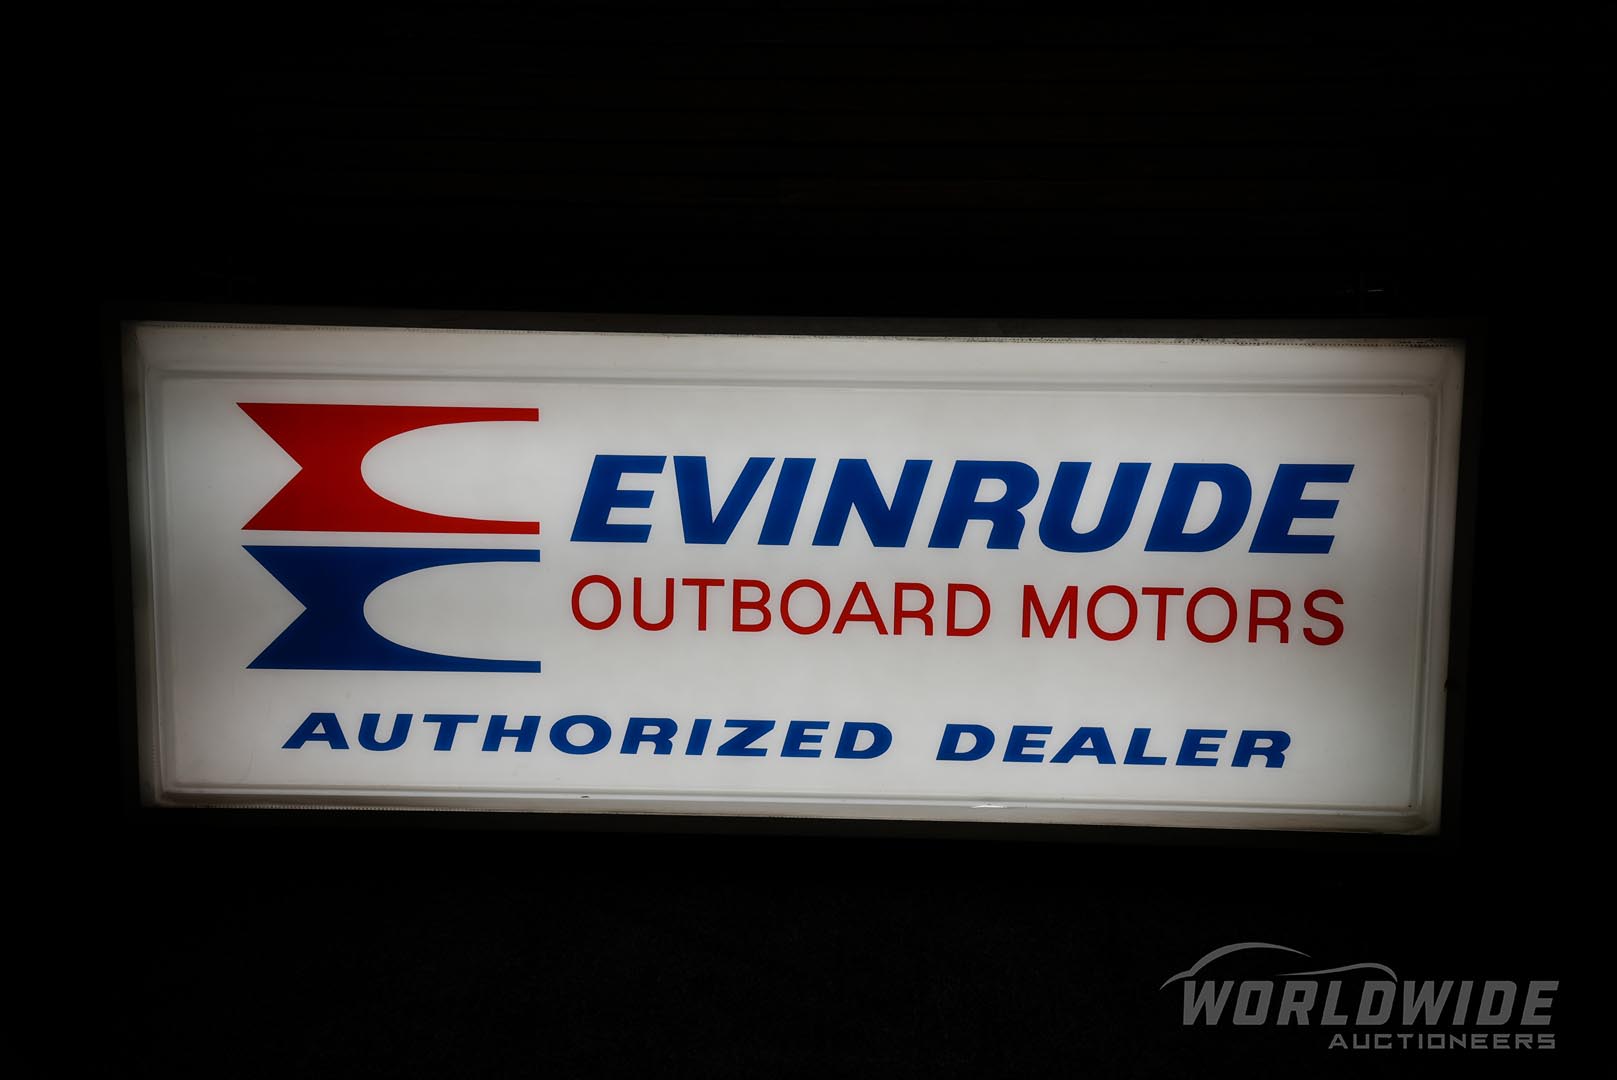  Evinrude Outboard Motors Autho rized Dealer Lighted Sign 